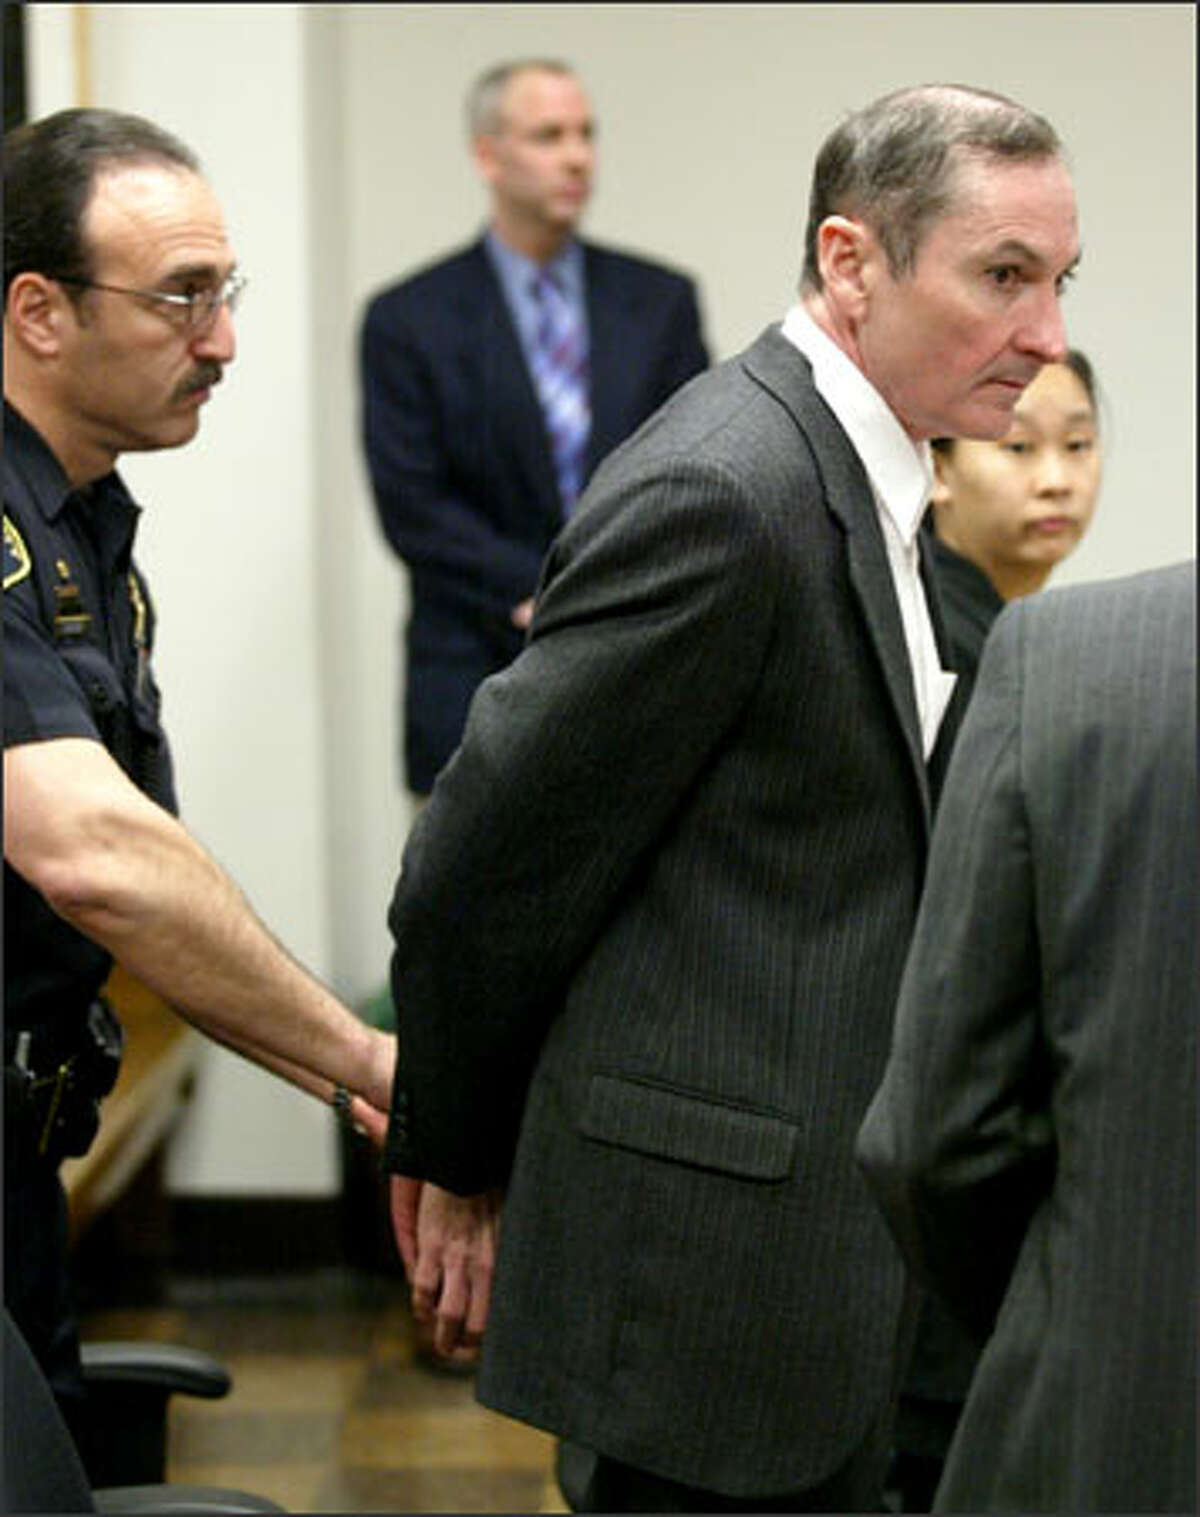 William Joice is handcuffed before being taken out of King County Superior Court after he was found guilty Tuesday of first-degree attempted murder in the shooting of Bellevue lawyer Kevin Jung.